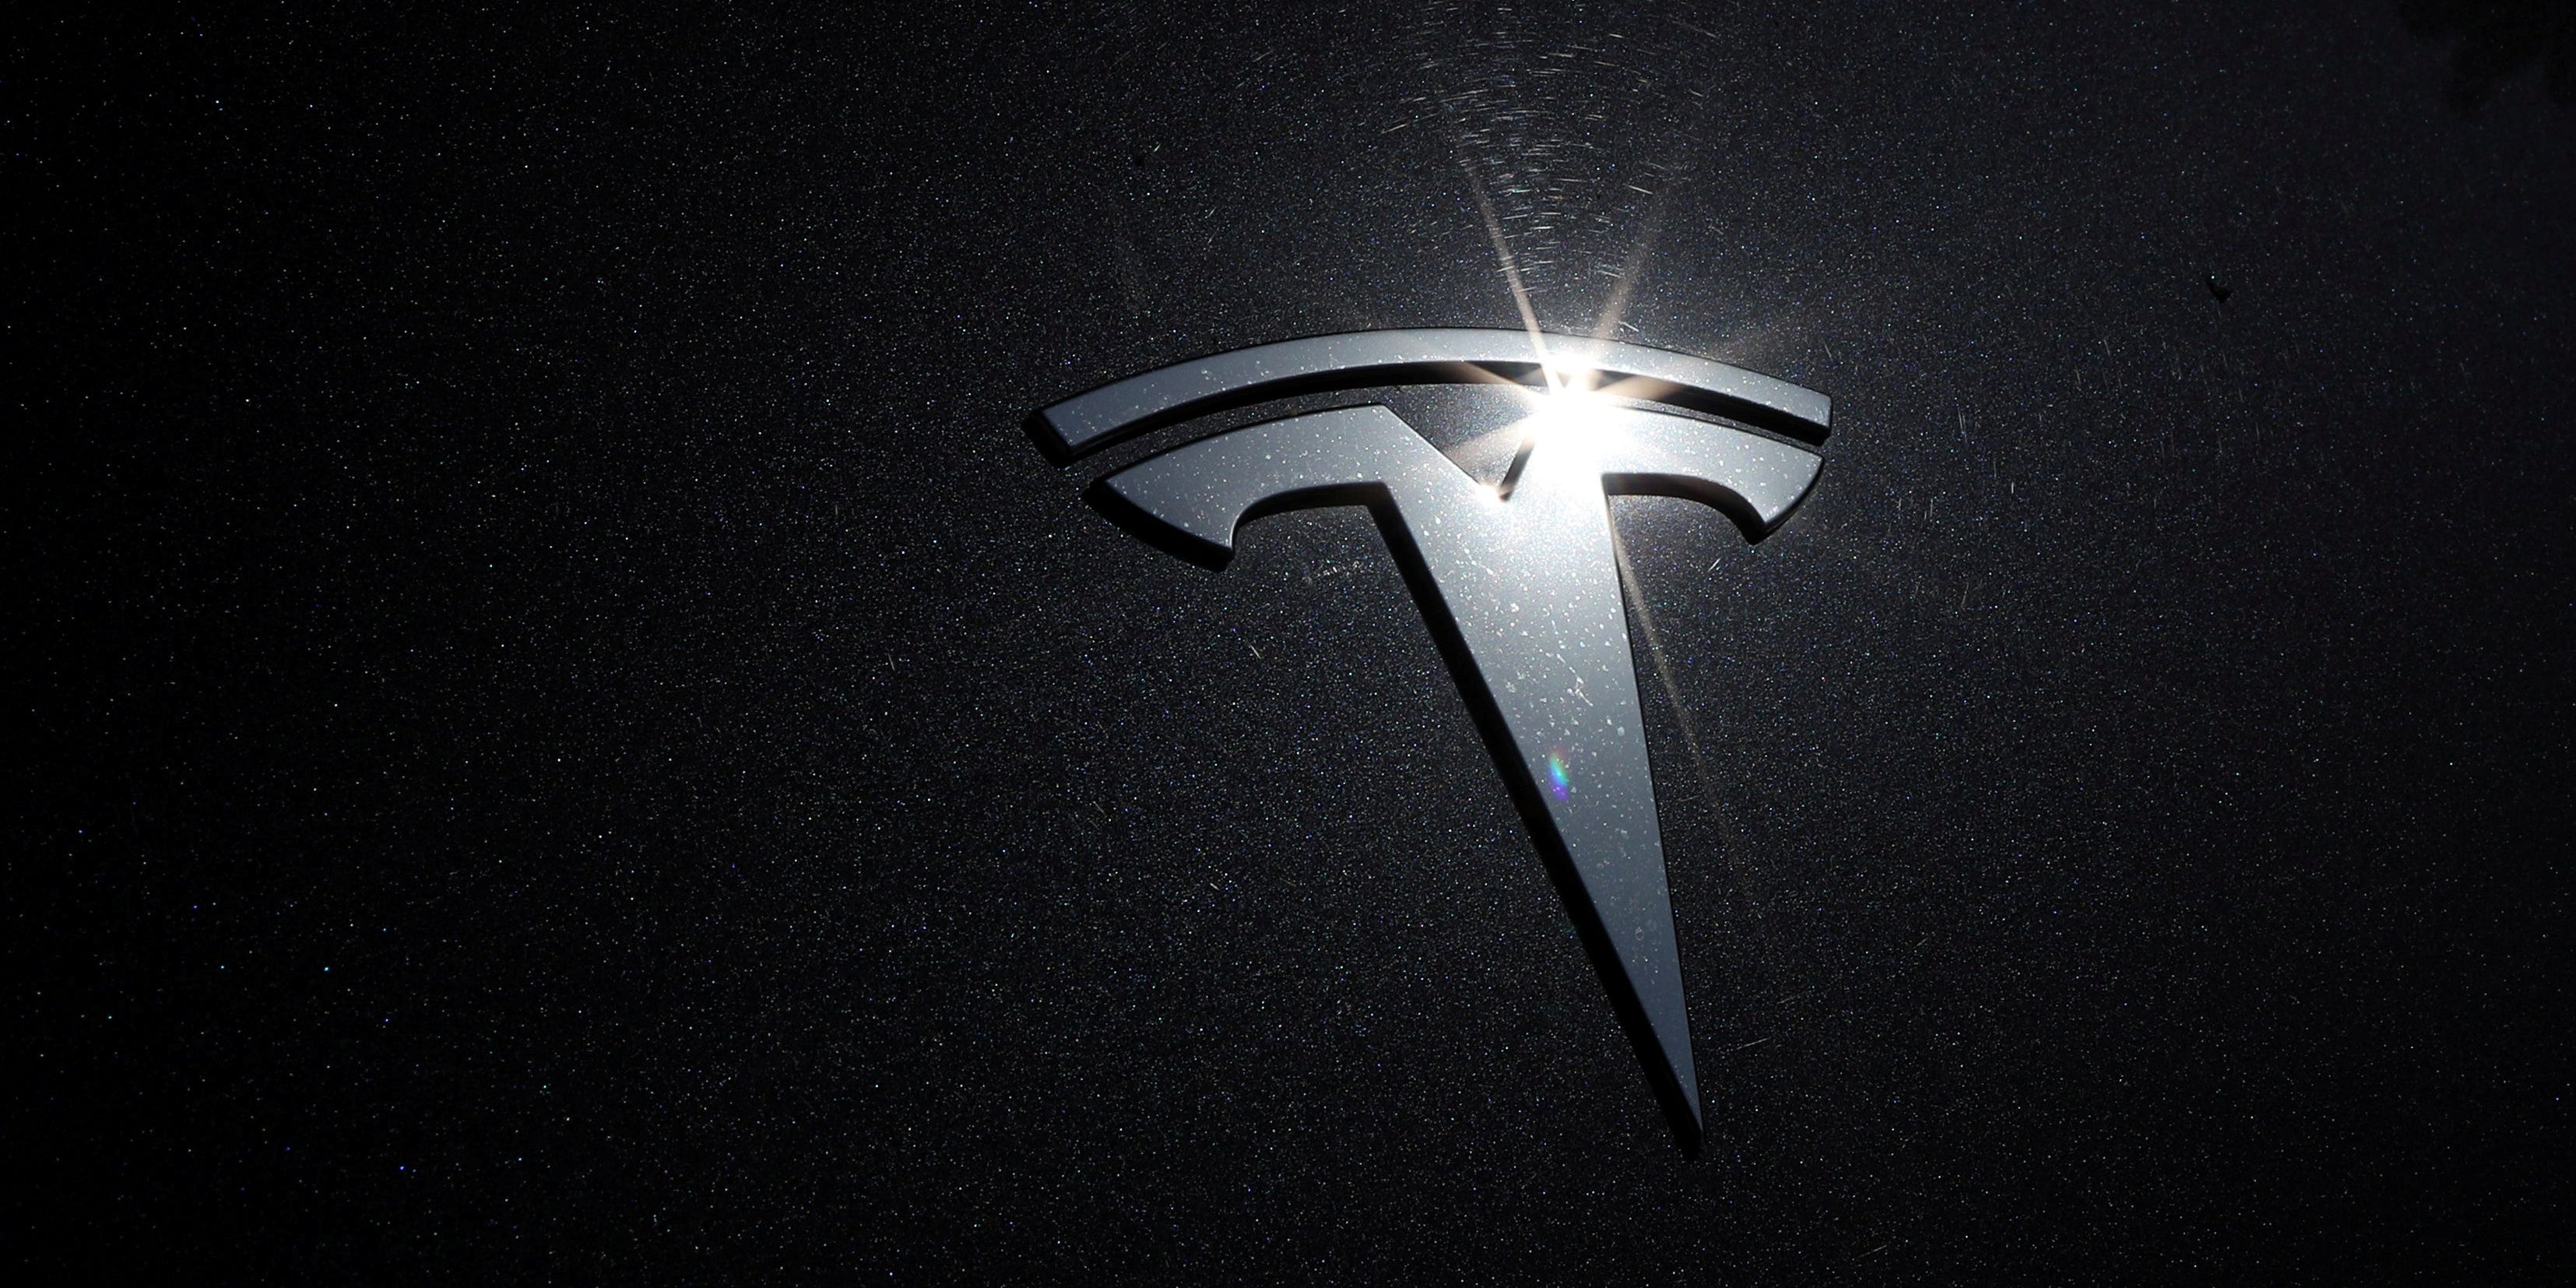 Tesla will join the S&P 500 in December after being snubbed earlier this year